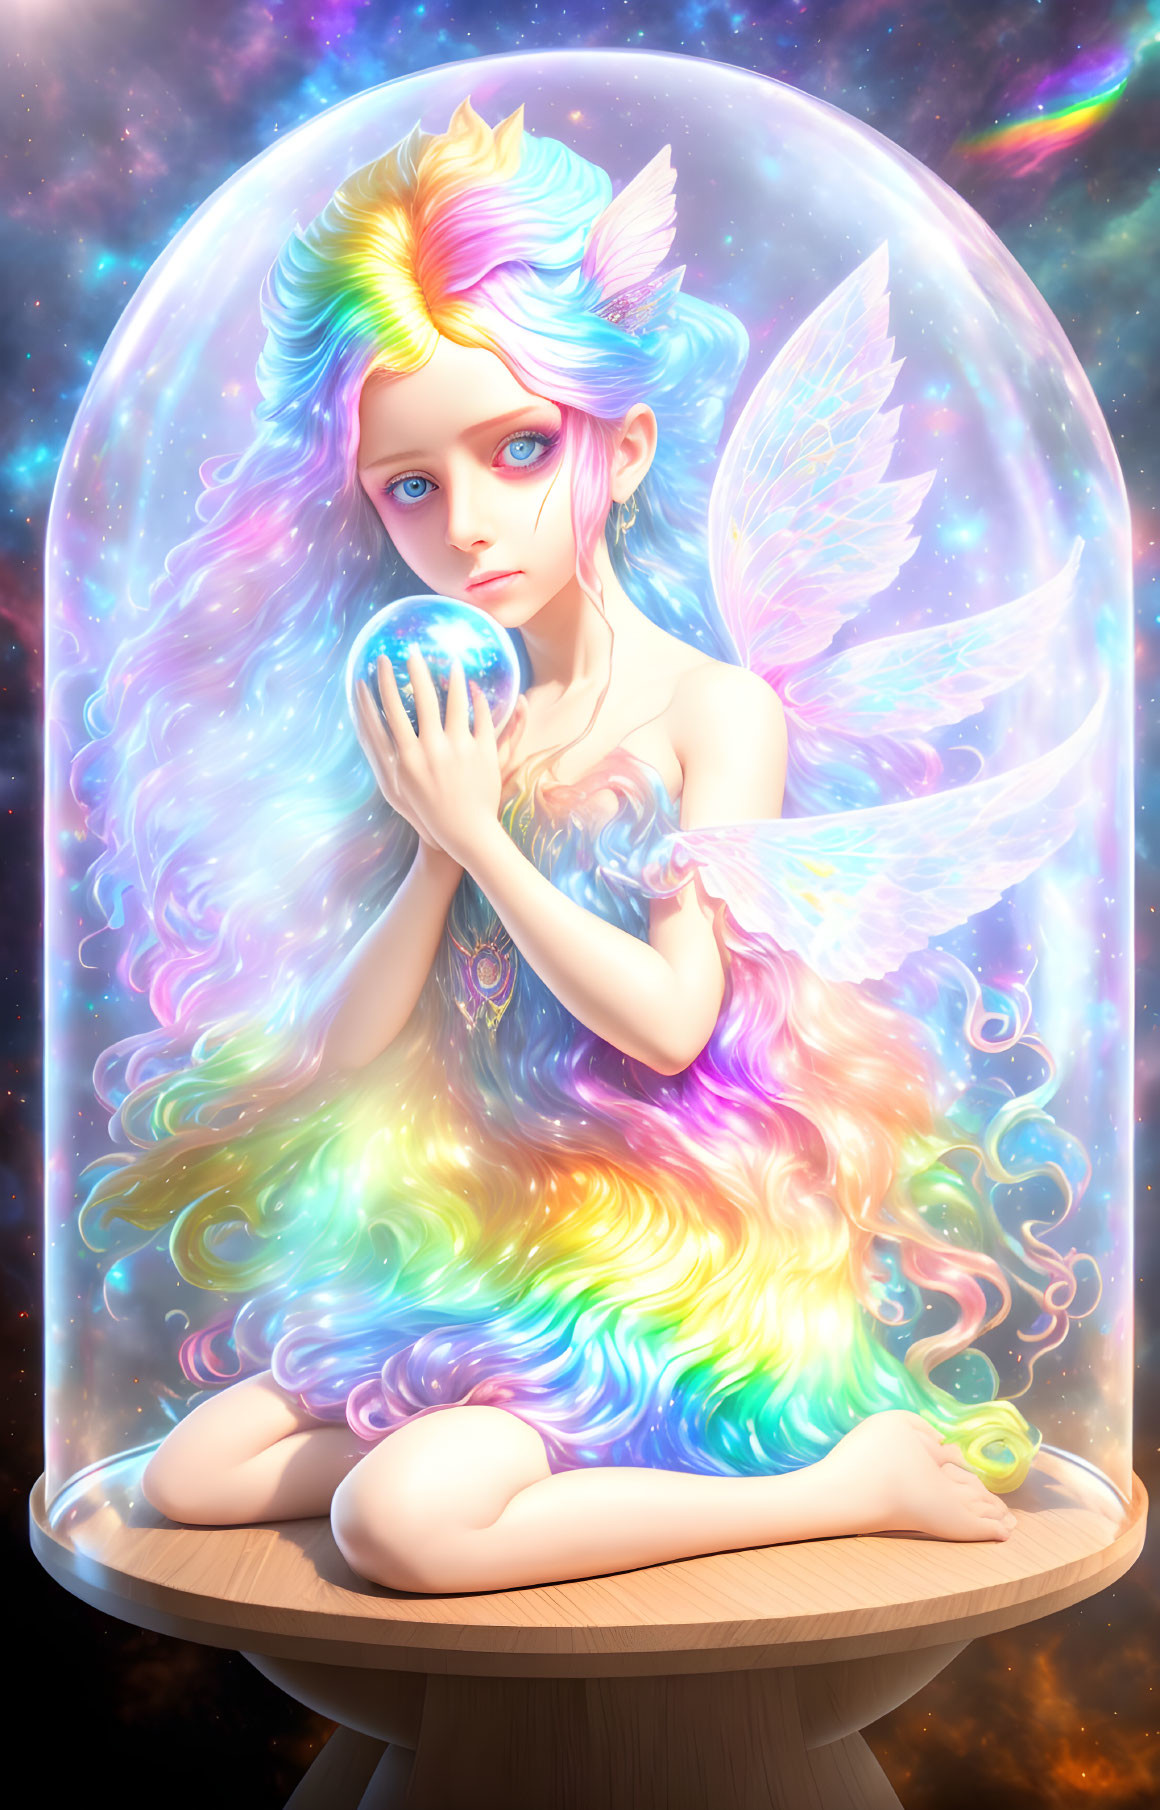 Colorful fairy with rainbow hair and wings holding a glowing orb in glass dome on cosmic background